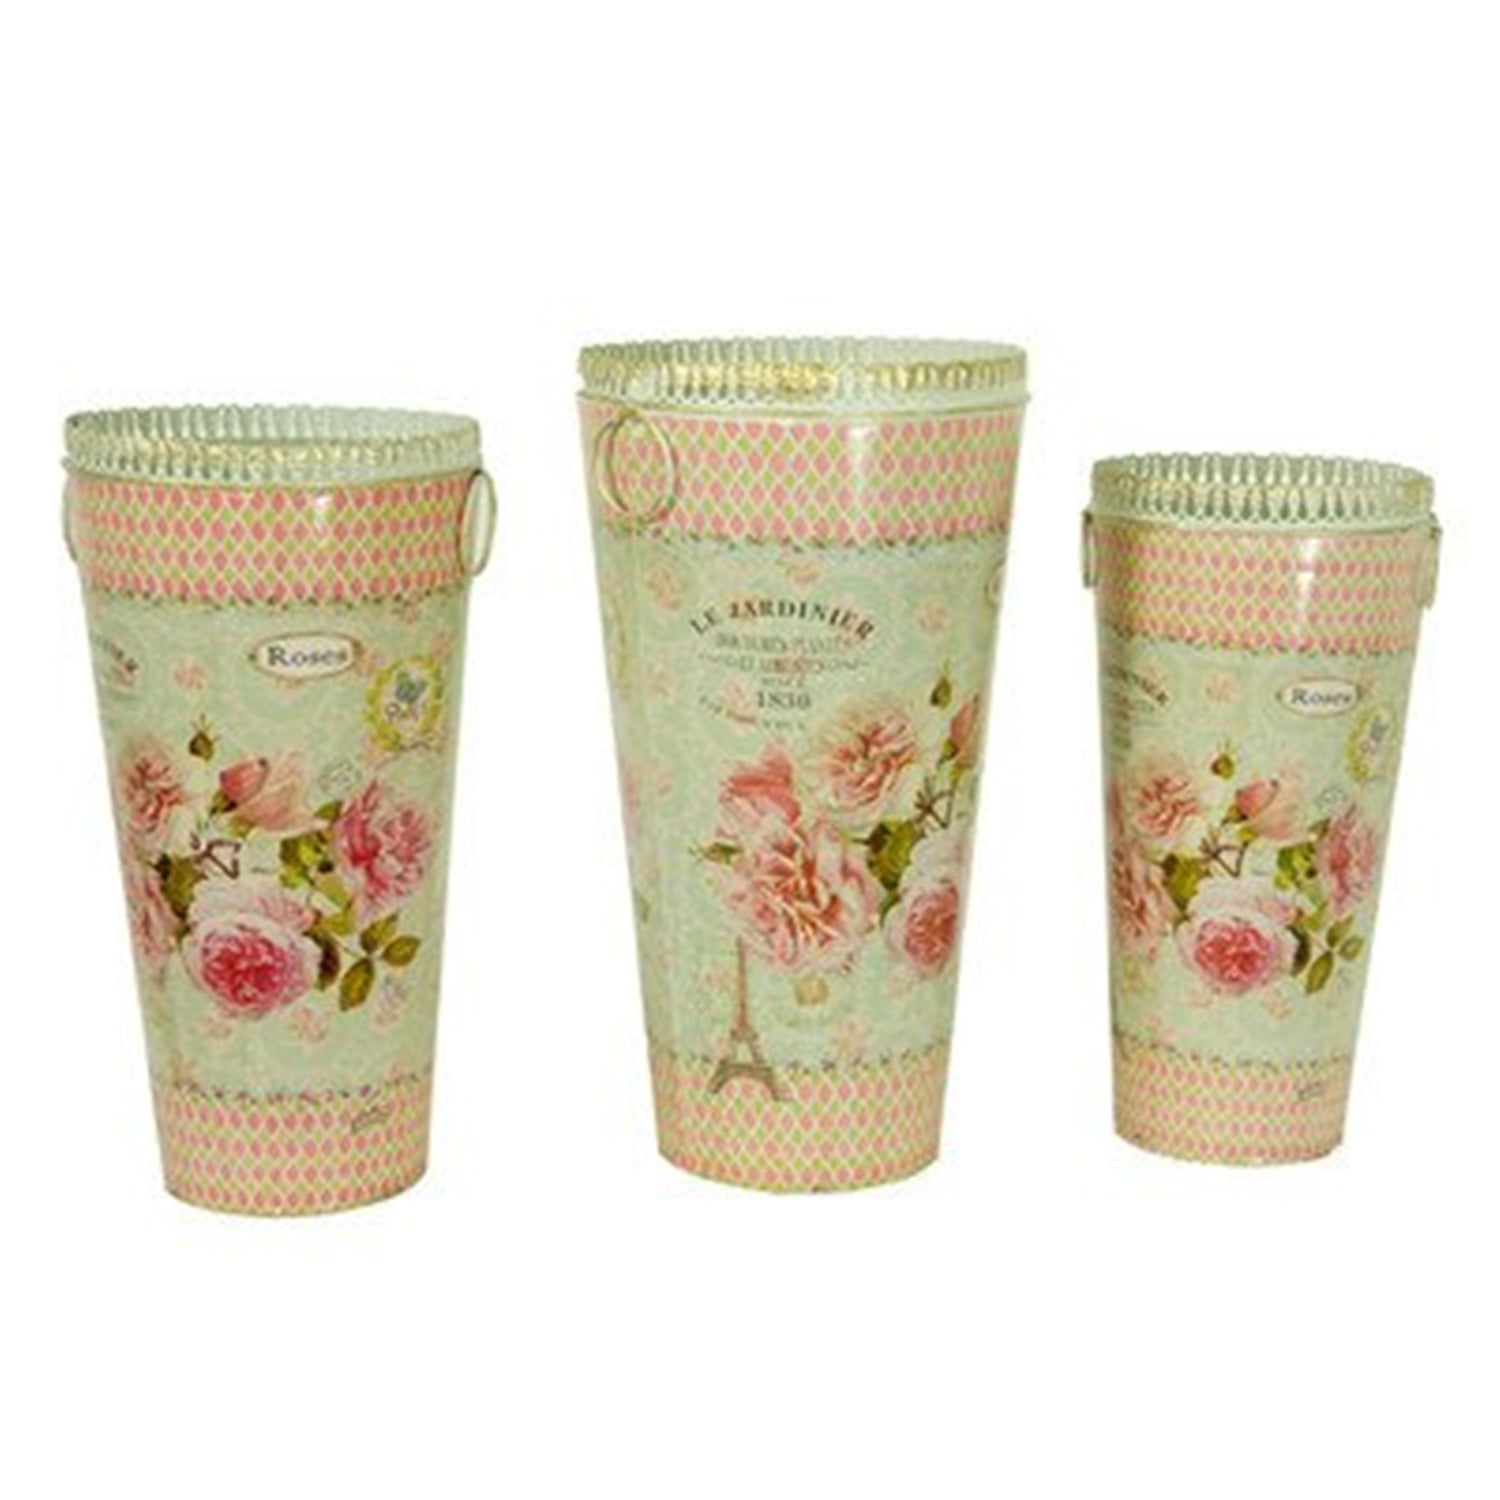 Dmmv853-s3 French Country Planters Tall Cylinder Vintage Metal Decorative Vases & Umbrella Holder - Set Of 3